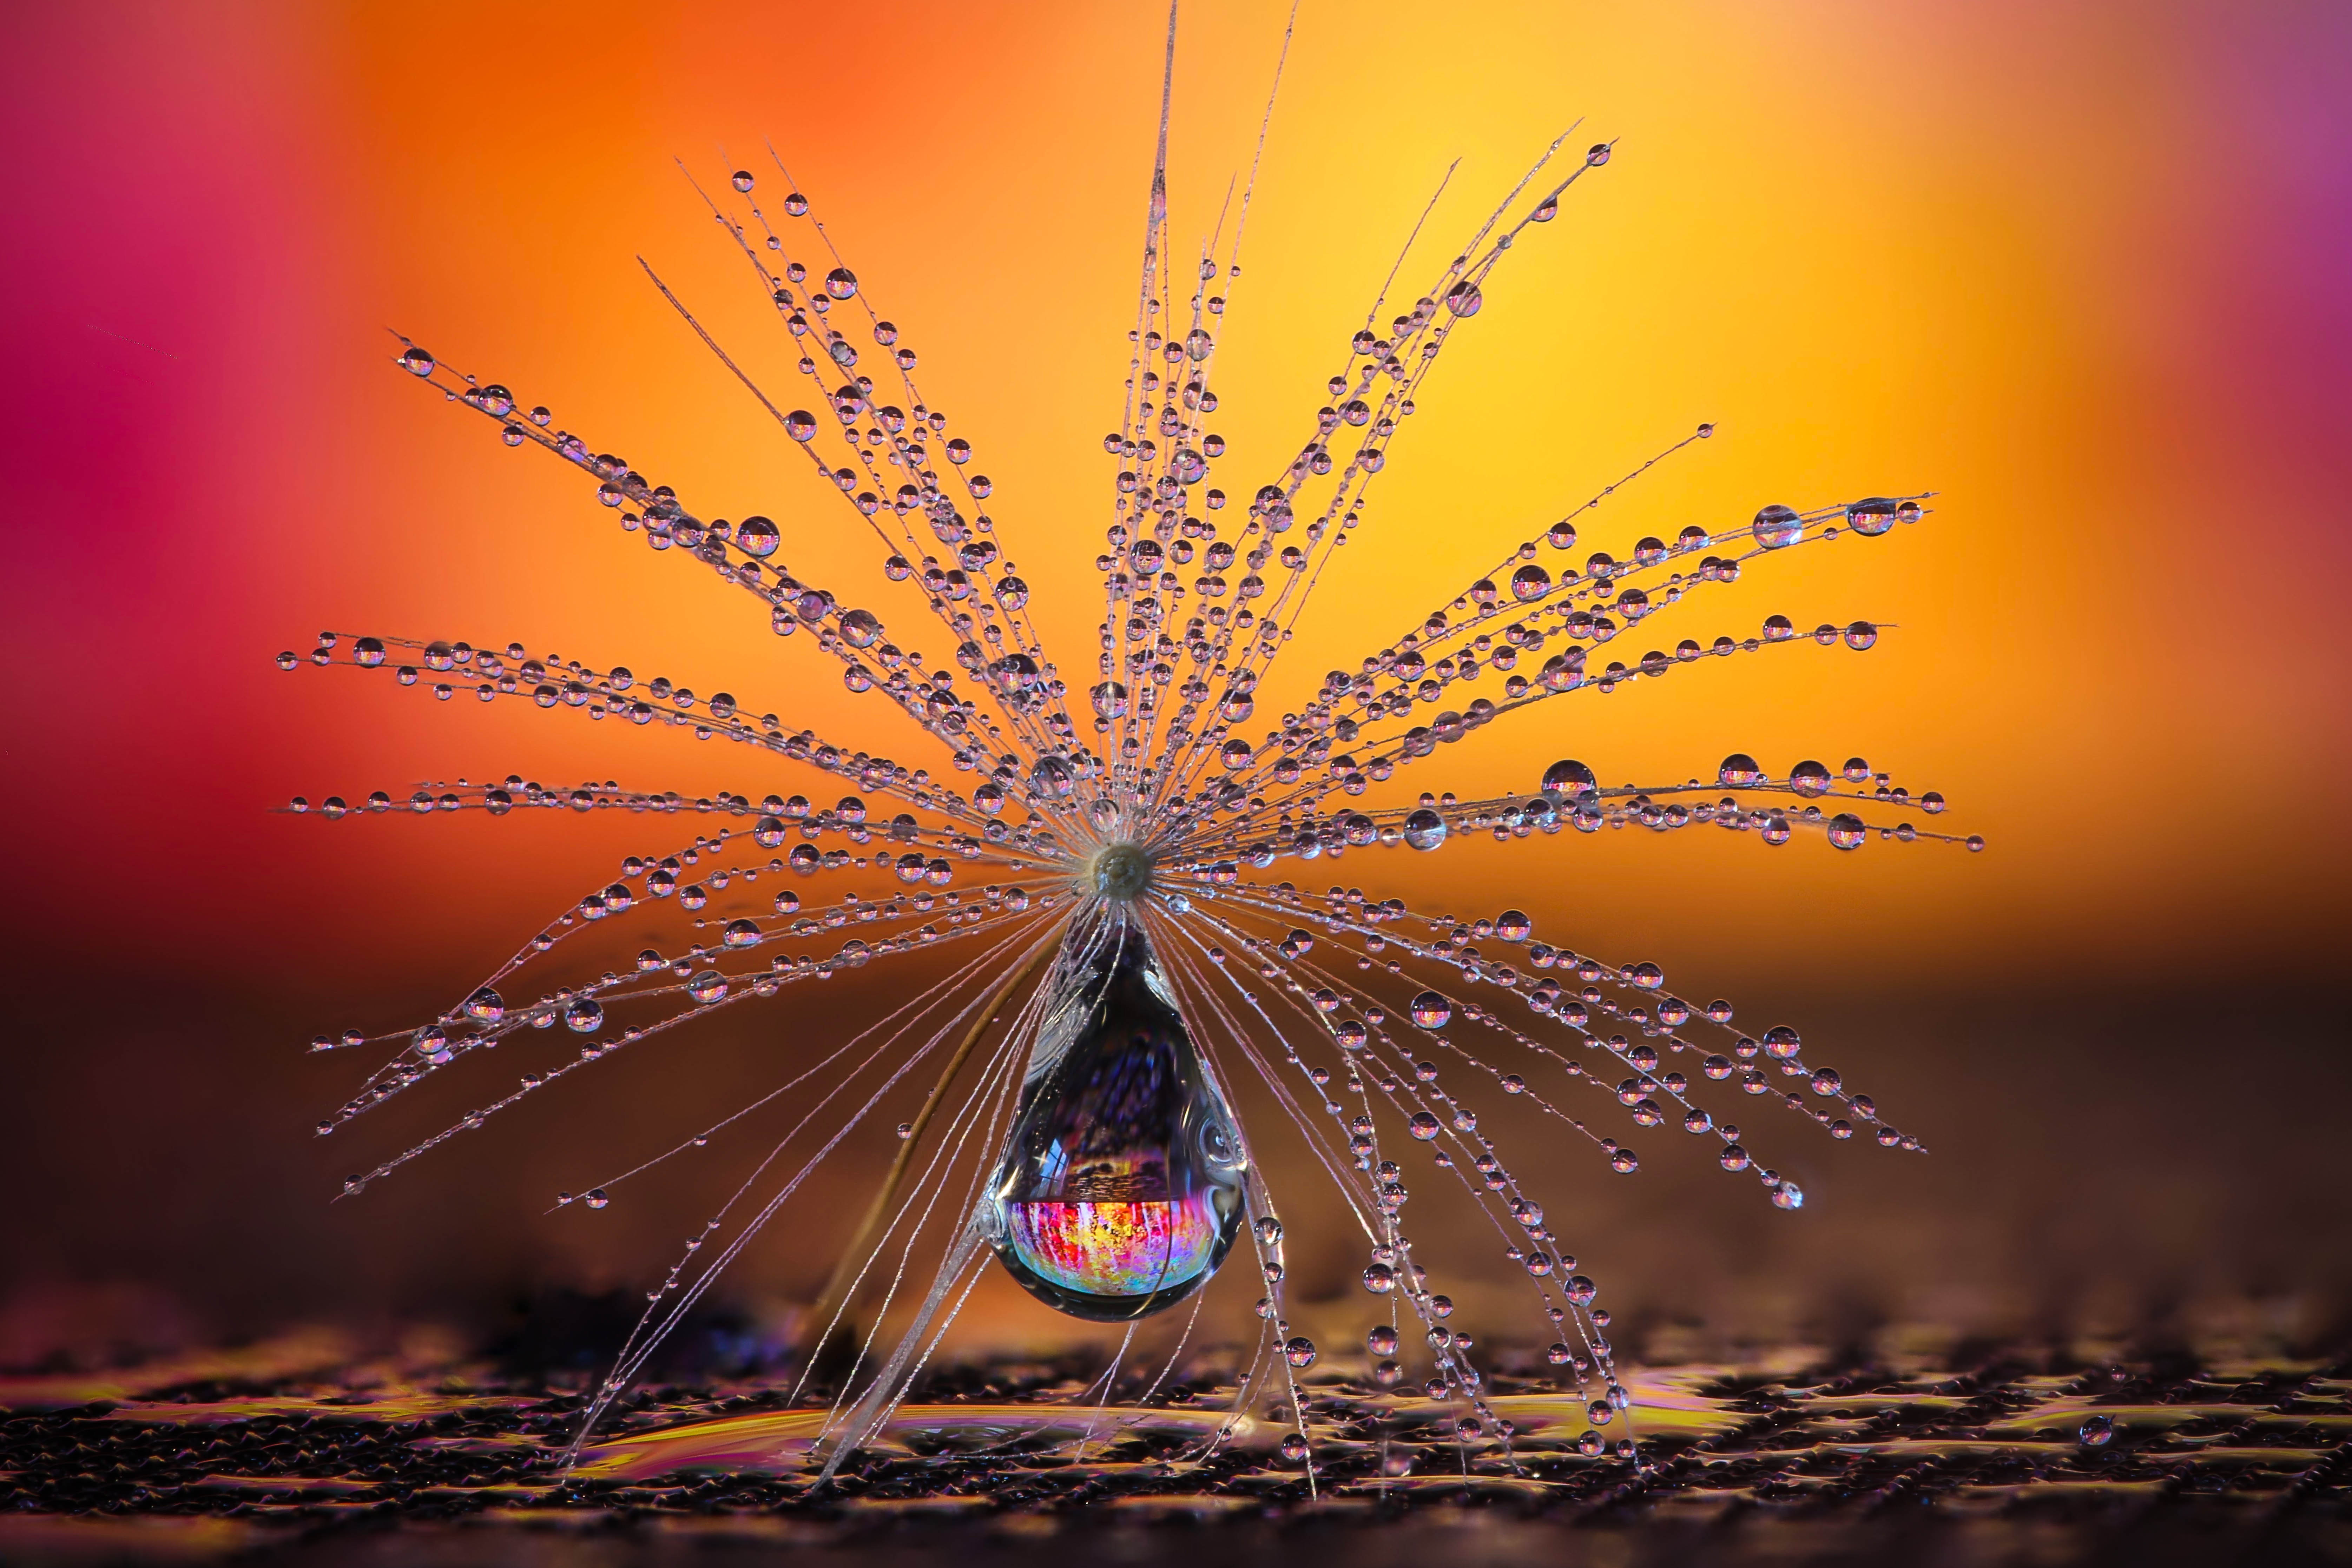 Rain droplets have been captured on this dandelion clock seed to create a striking image by Petra Jung from Switzerland